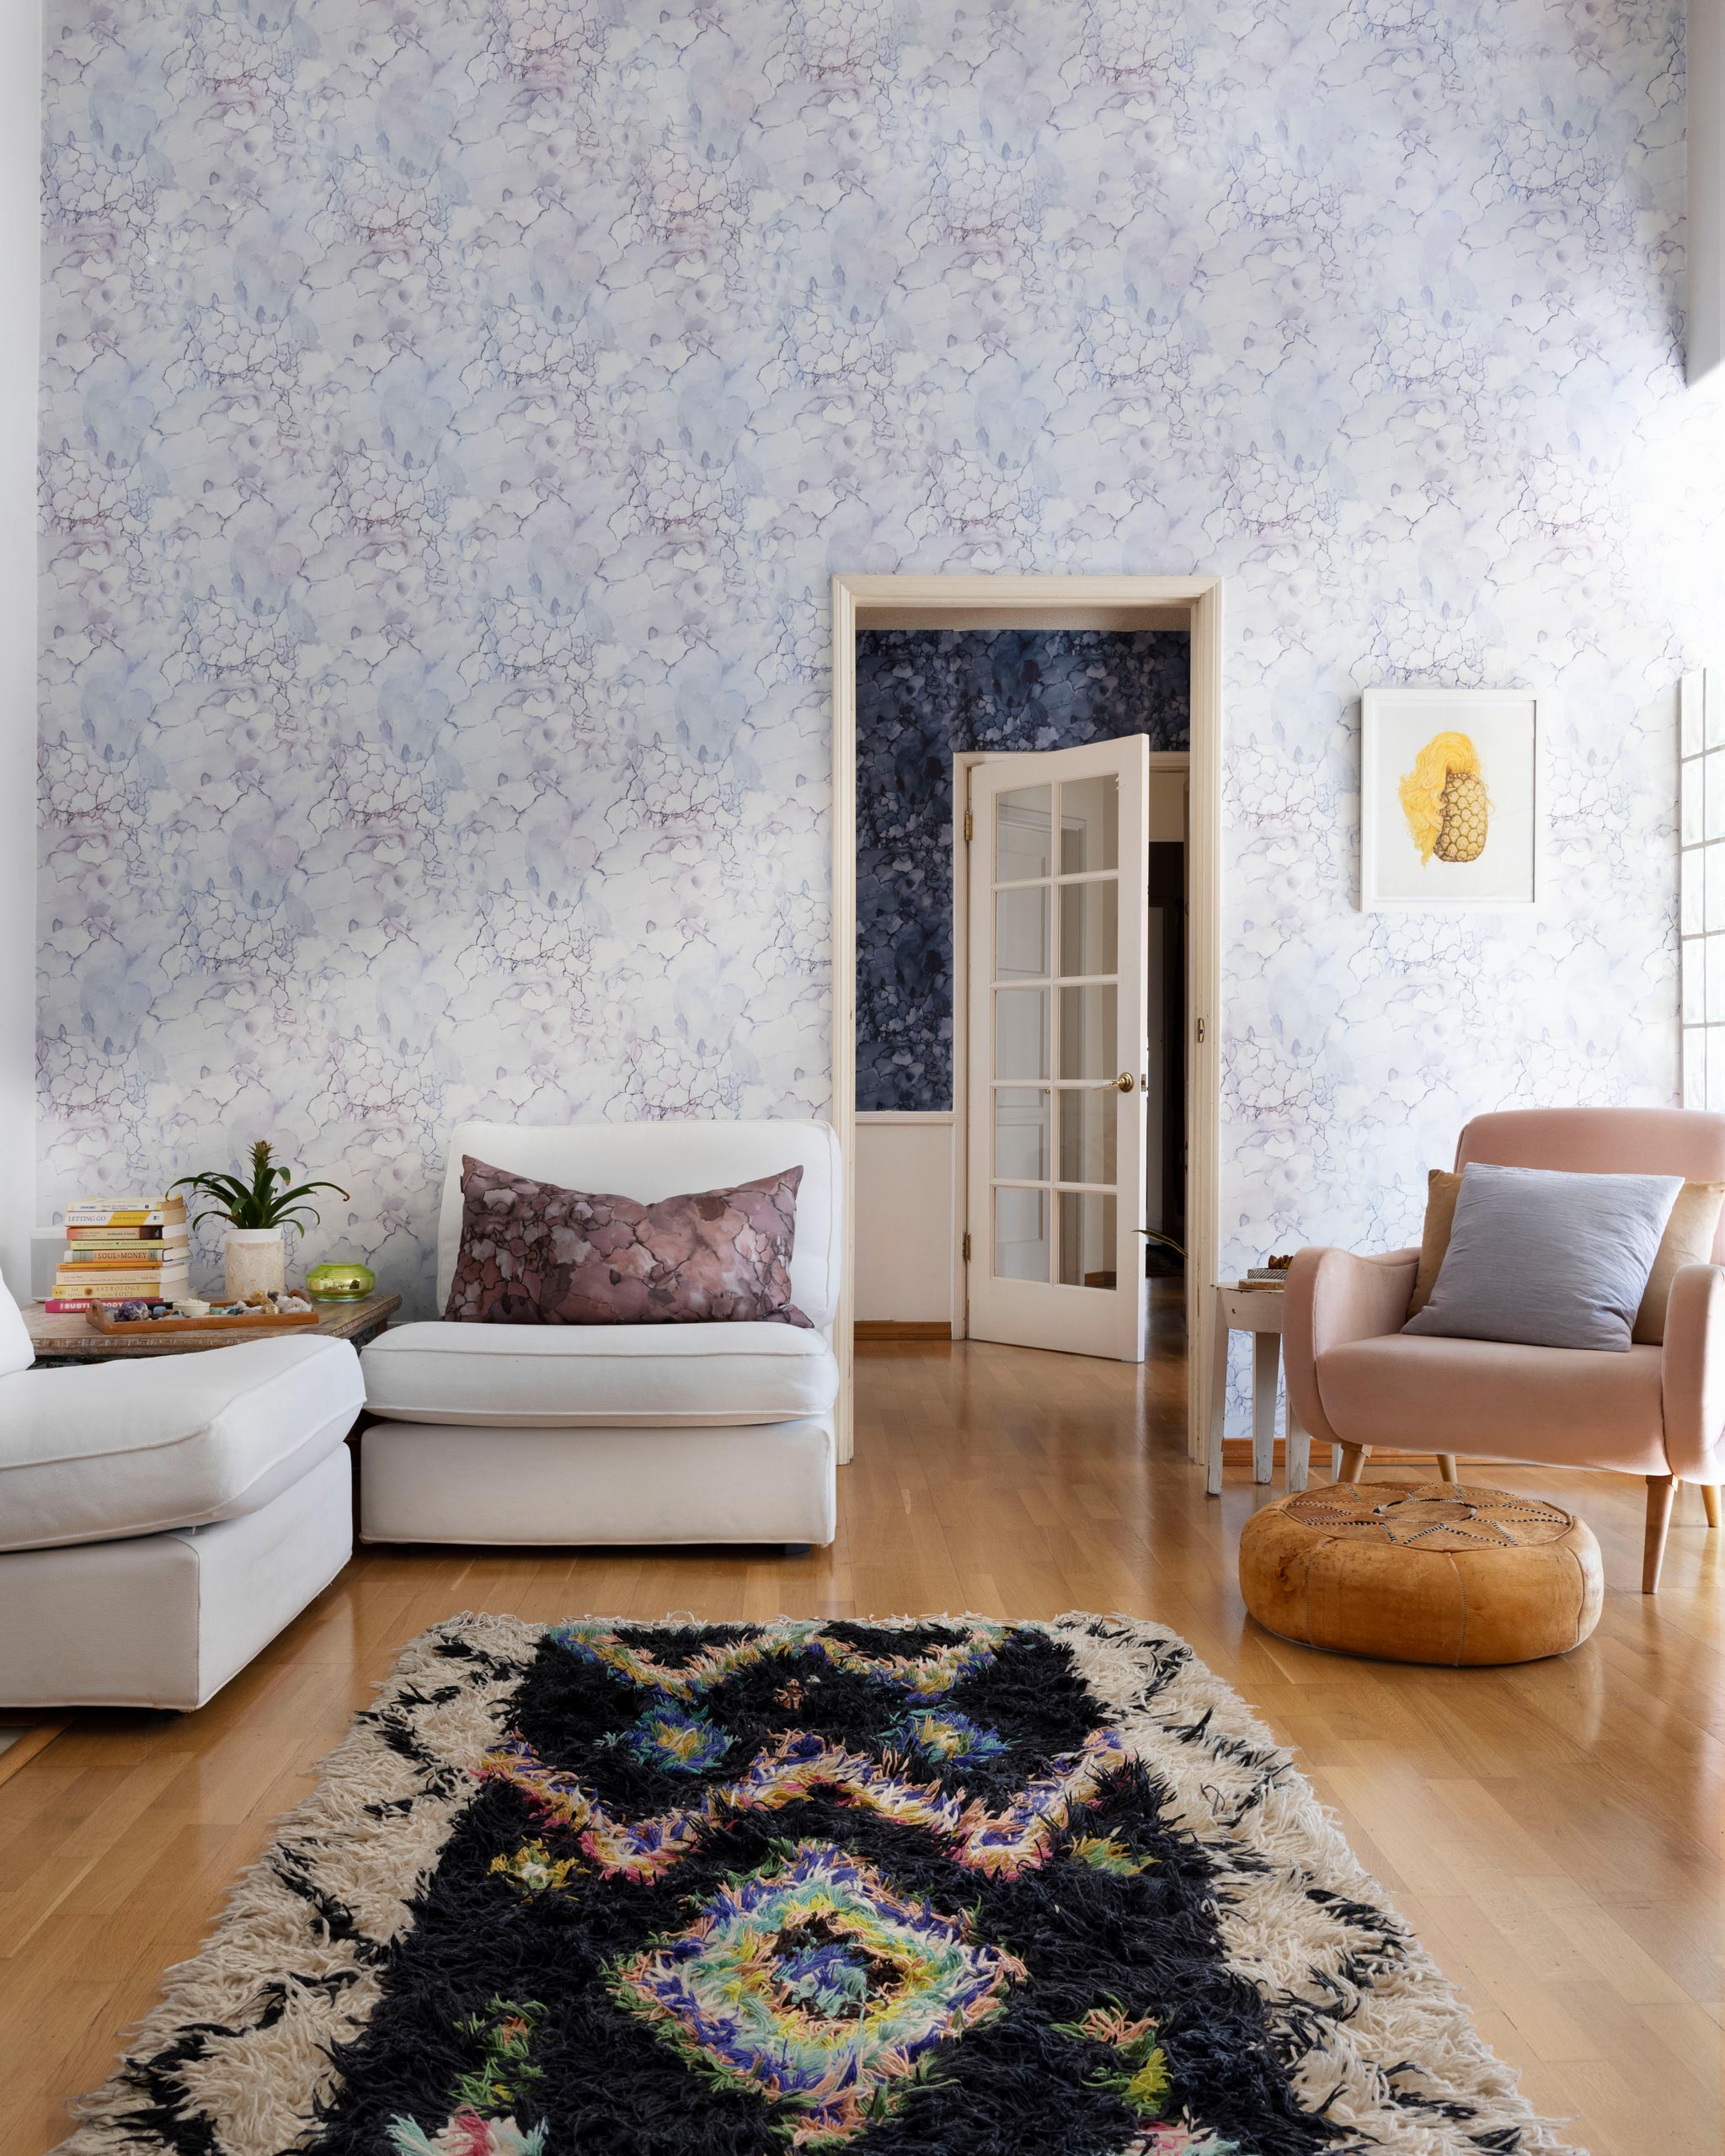 A maximalist living room tableau with walls papered in an abstract textural print in white, purple and gray.